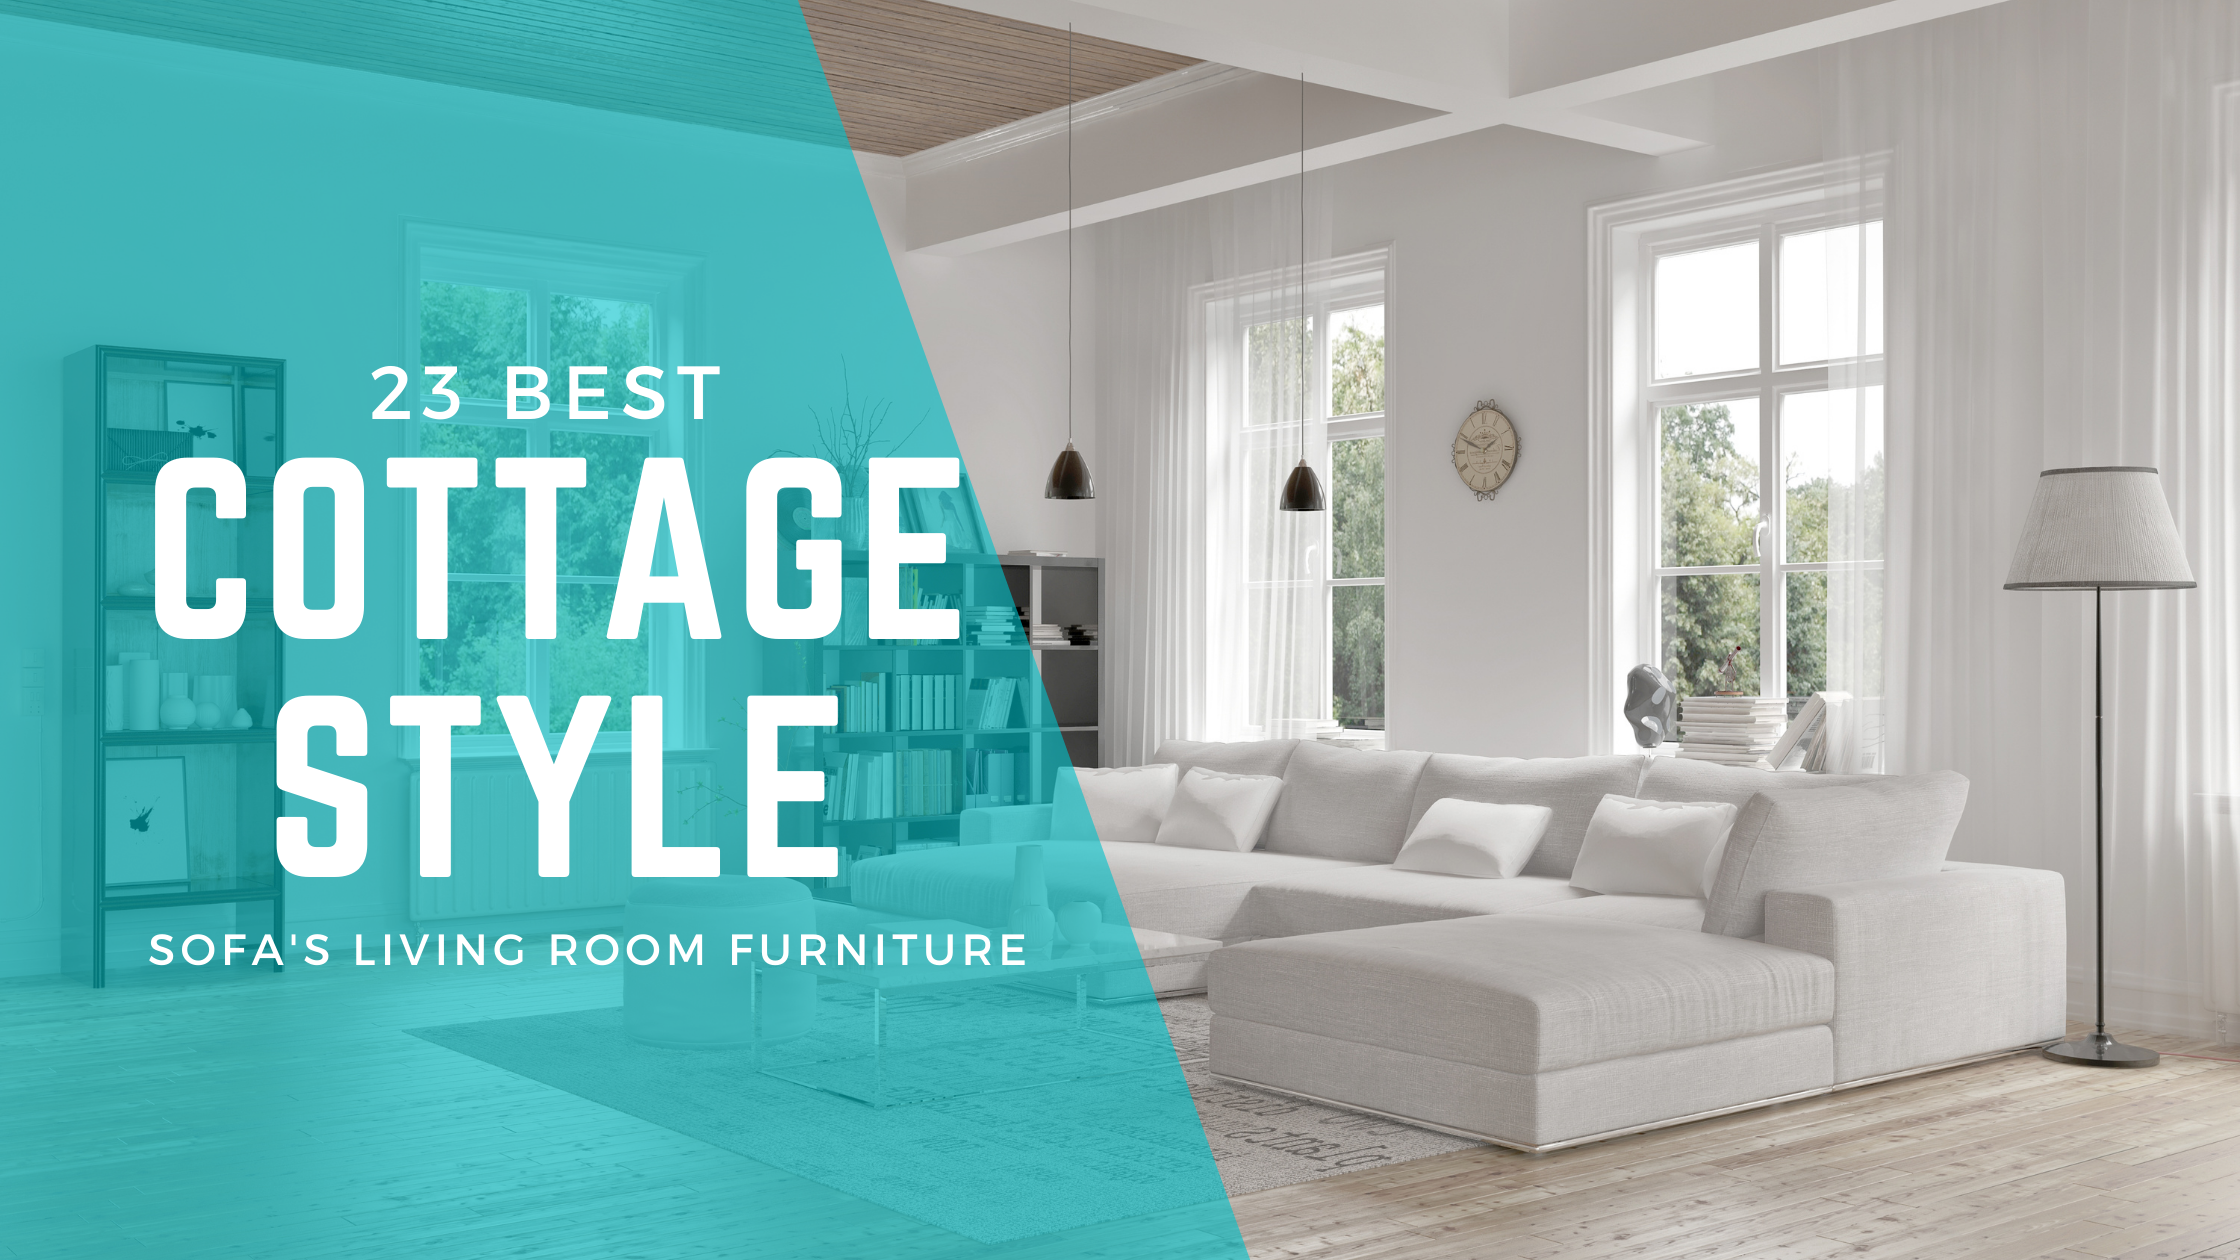 Cottage Style Sofa's Living Room Furniture: How to Create a Cottage Style Living Room